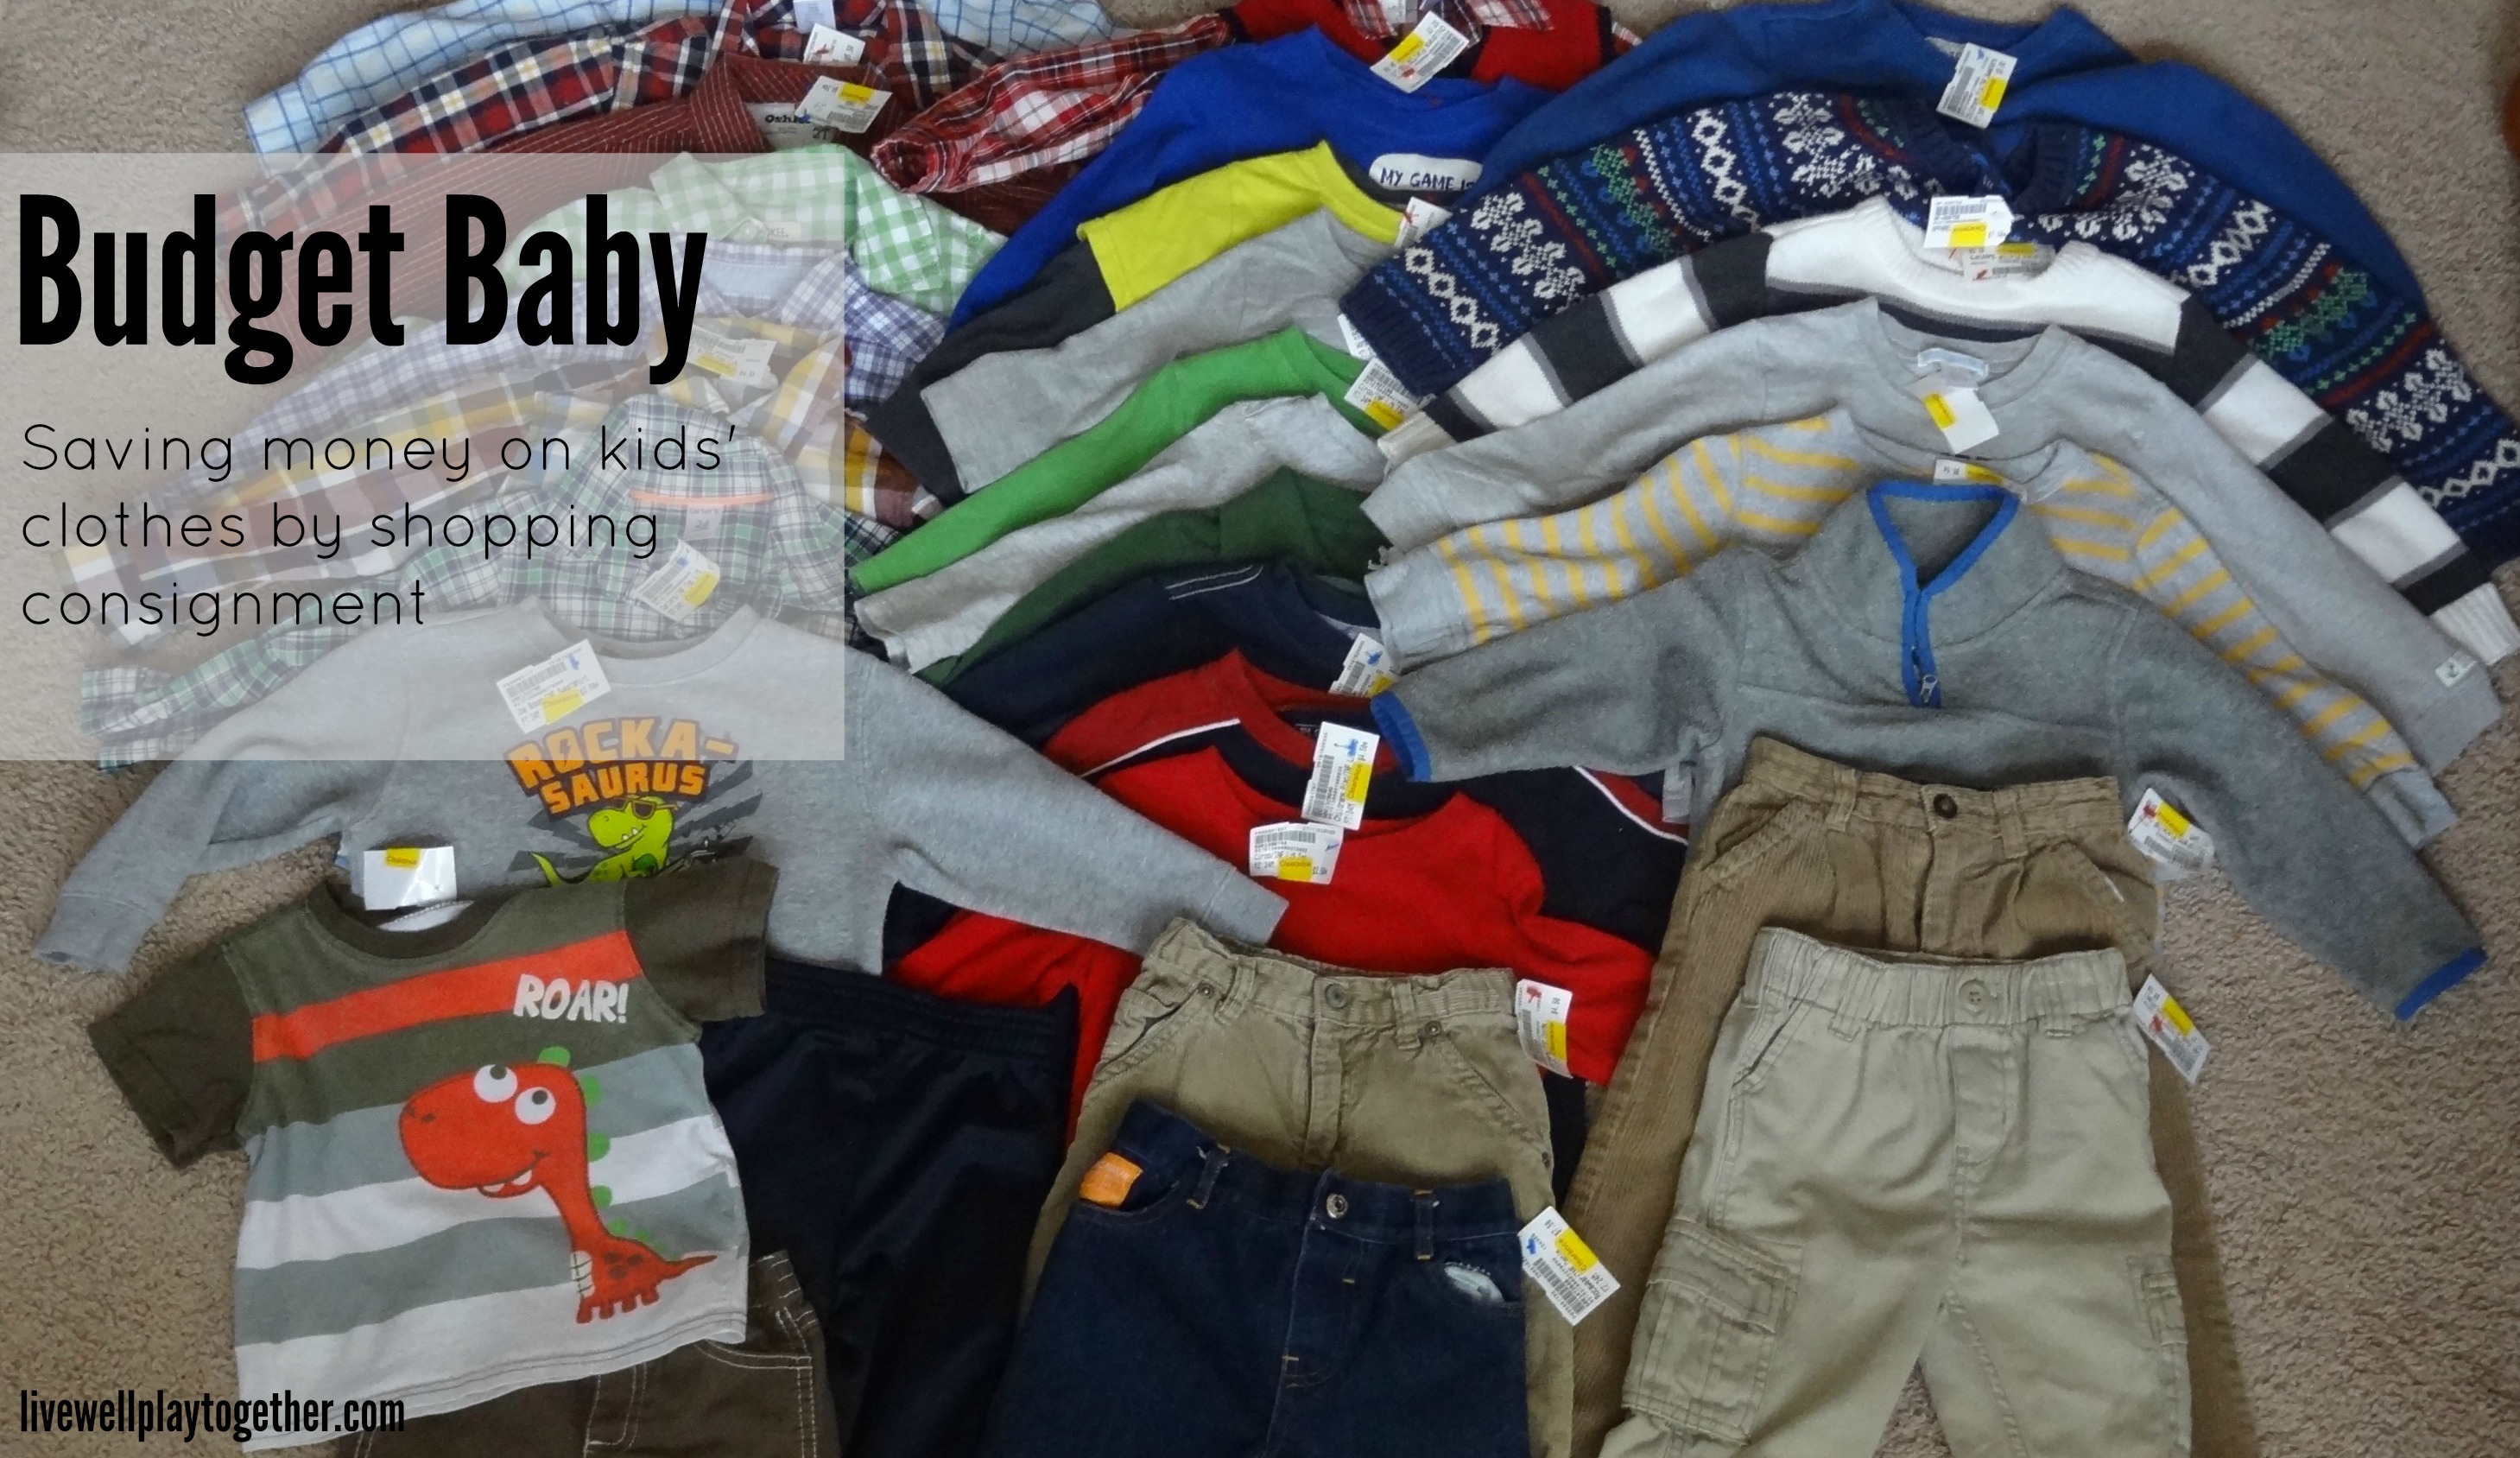 Budget Baby: Saving Money by shopping consignment for kids' clothes - Live Well Play Together